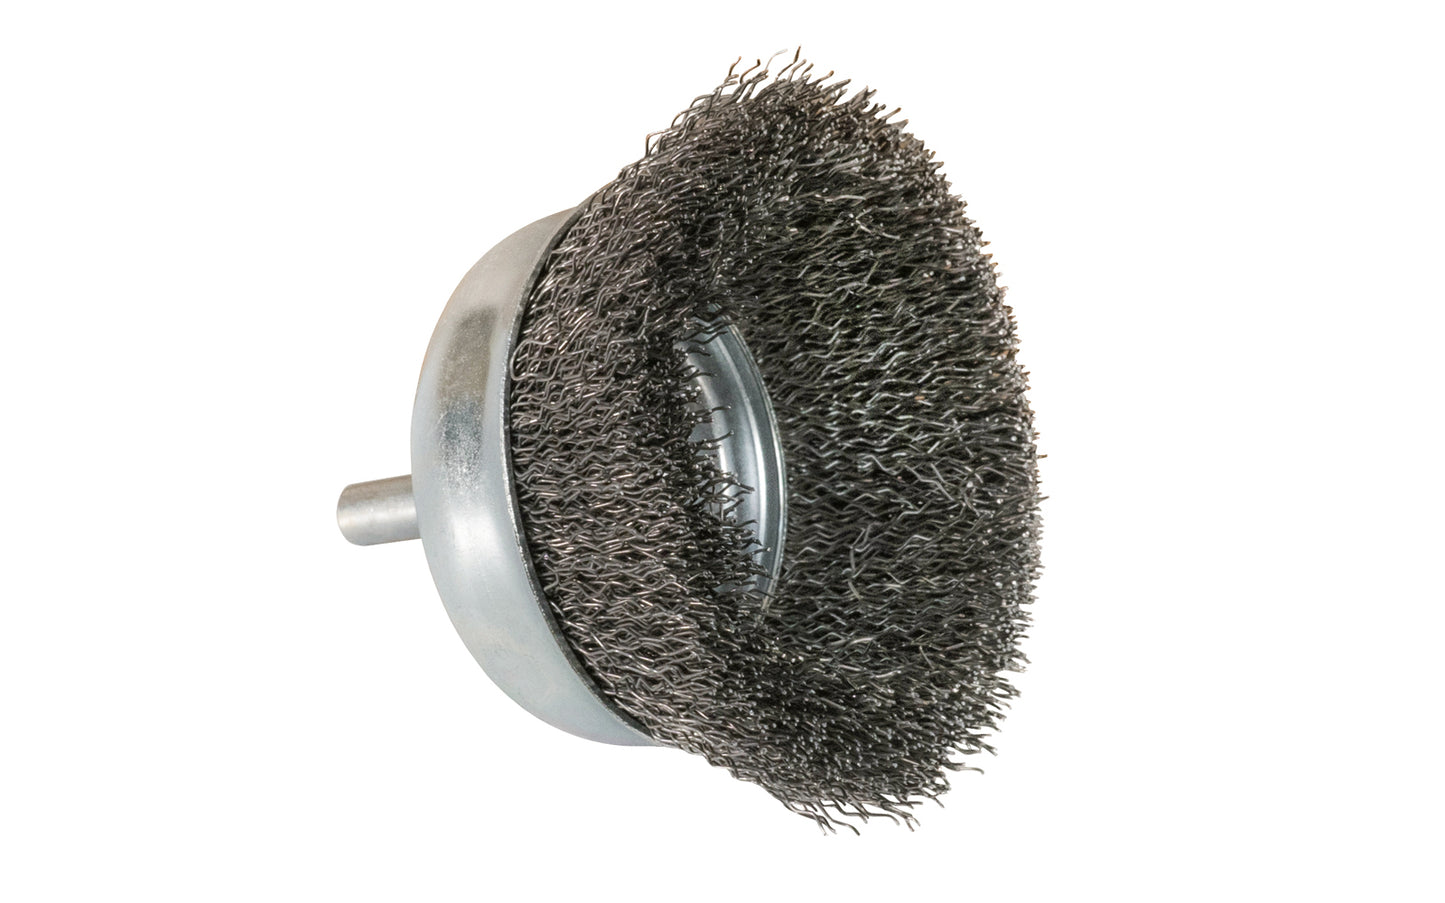 Alfa Tools 3" Fine Crimped Wire Cup Brush - 1/4" Shank. 0.008" Wire Diameter. 5000 RPM max. All-steel construction. Applications include deburring, blending, removal of rust, scale, dirt, & finish preparation prior to painting or plating. Made by Alfa Tools. Made in Spain. 